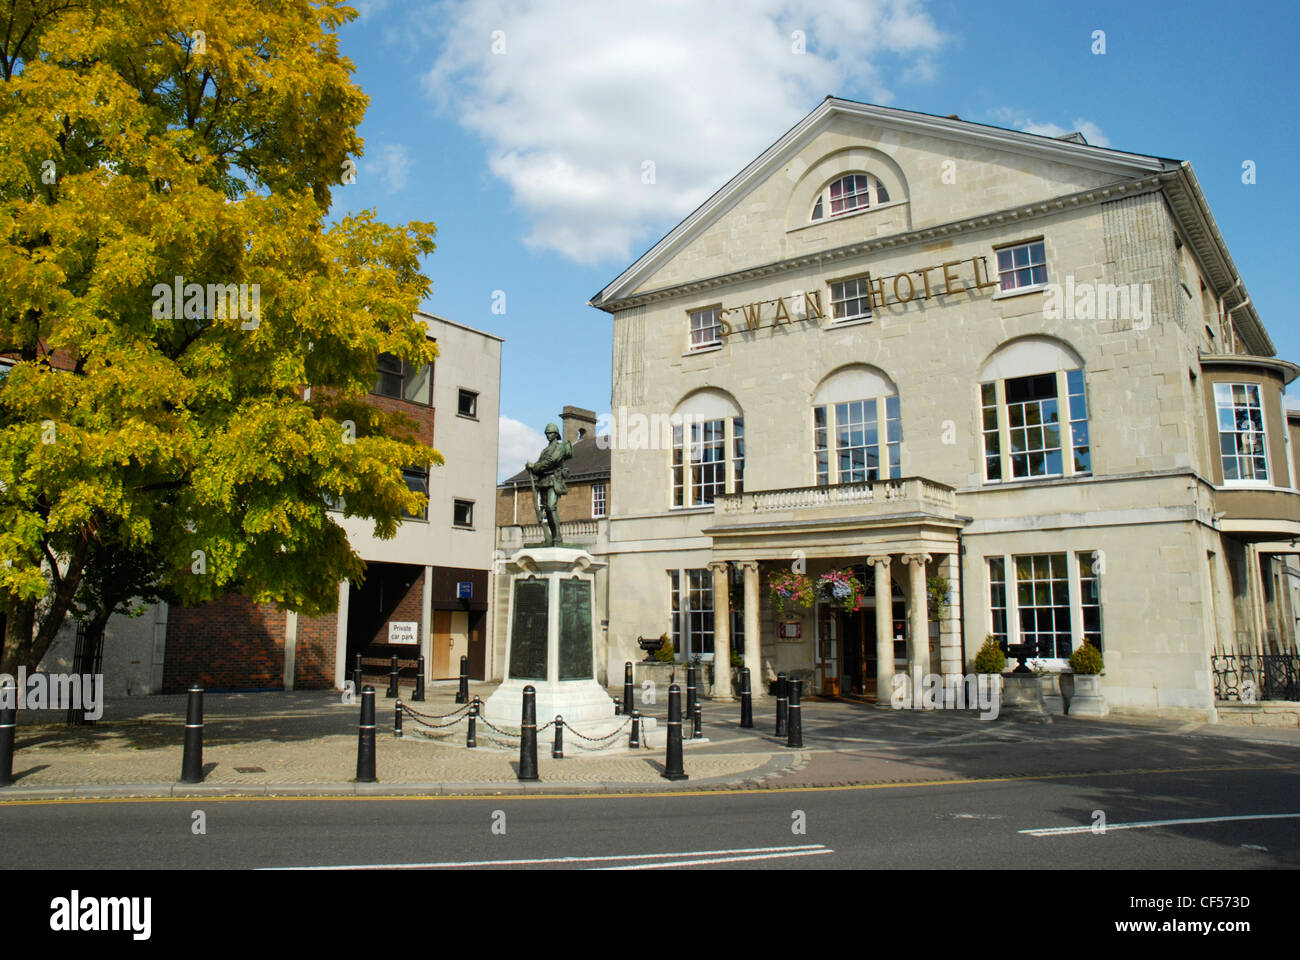 Looking across the road to the Swan Hotel in Bedford. Stock Photo